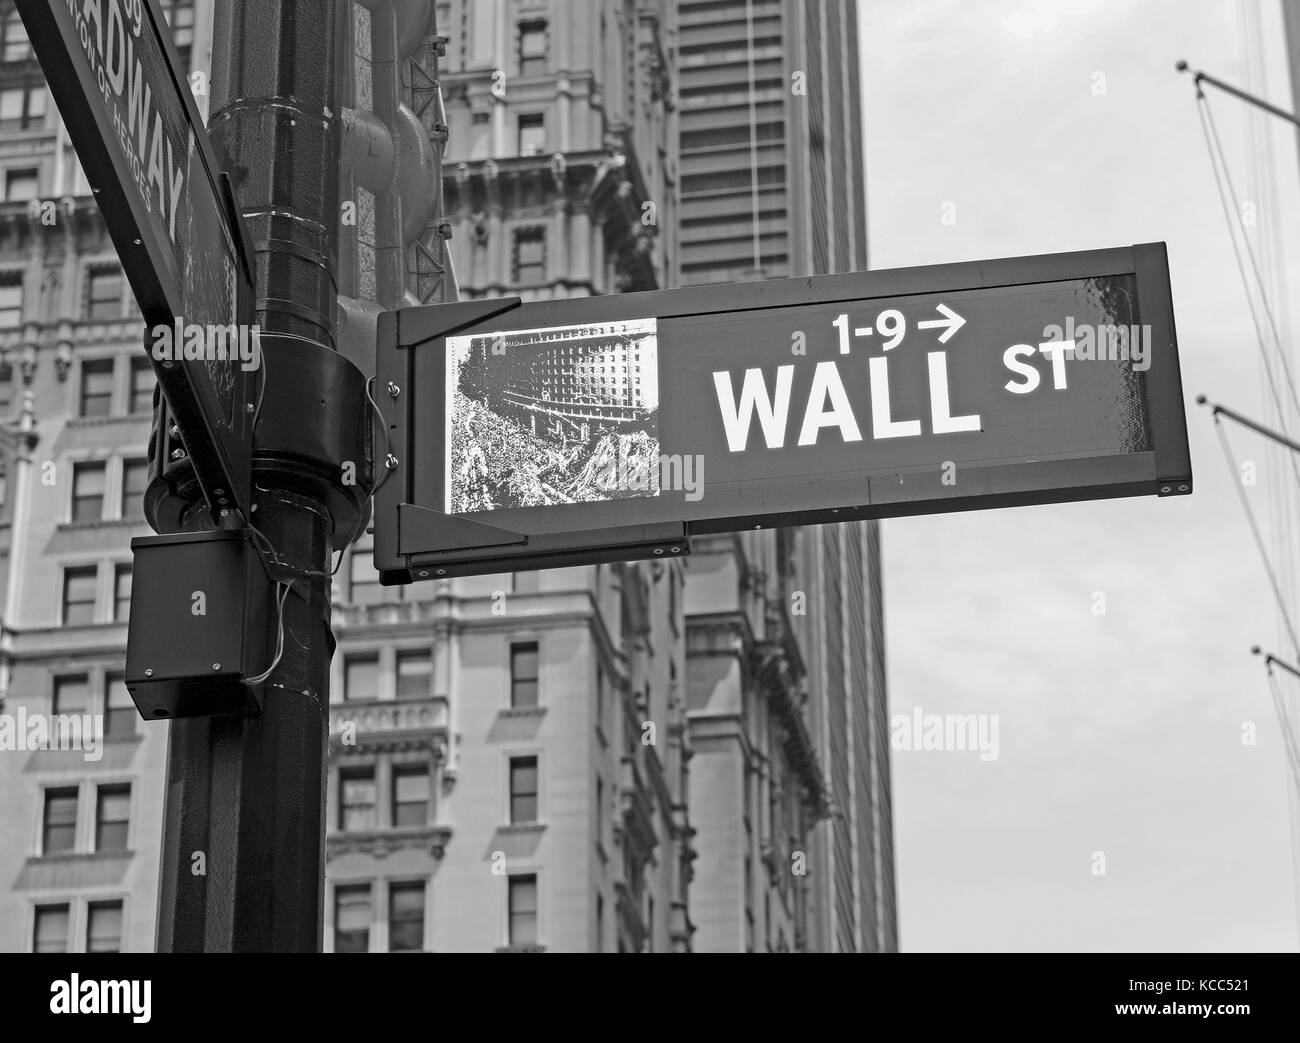 Wall Street road sign in Manhattan New York Stock Photo